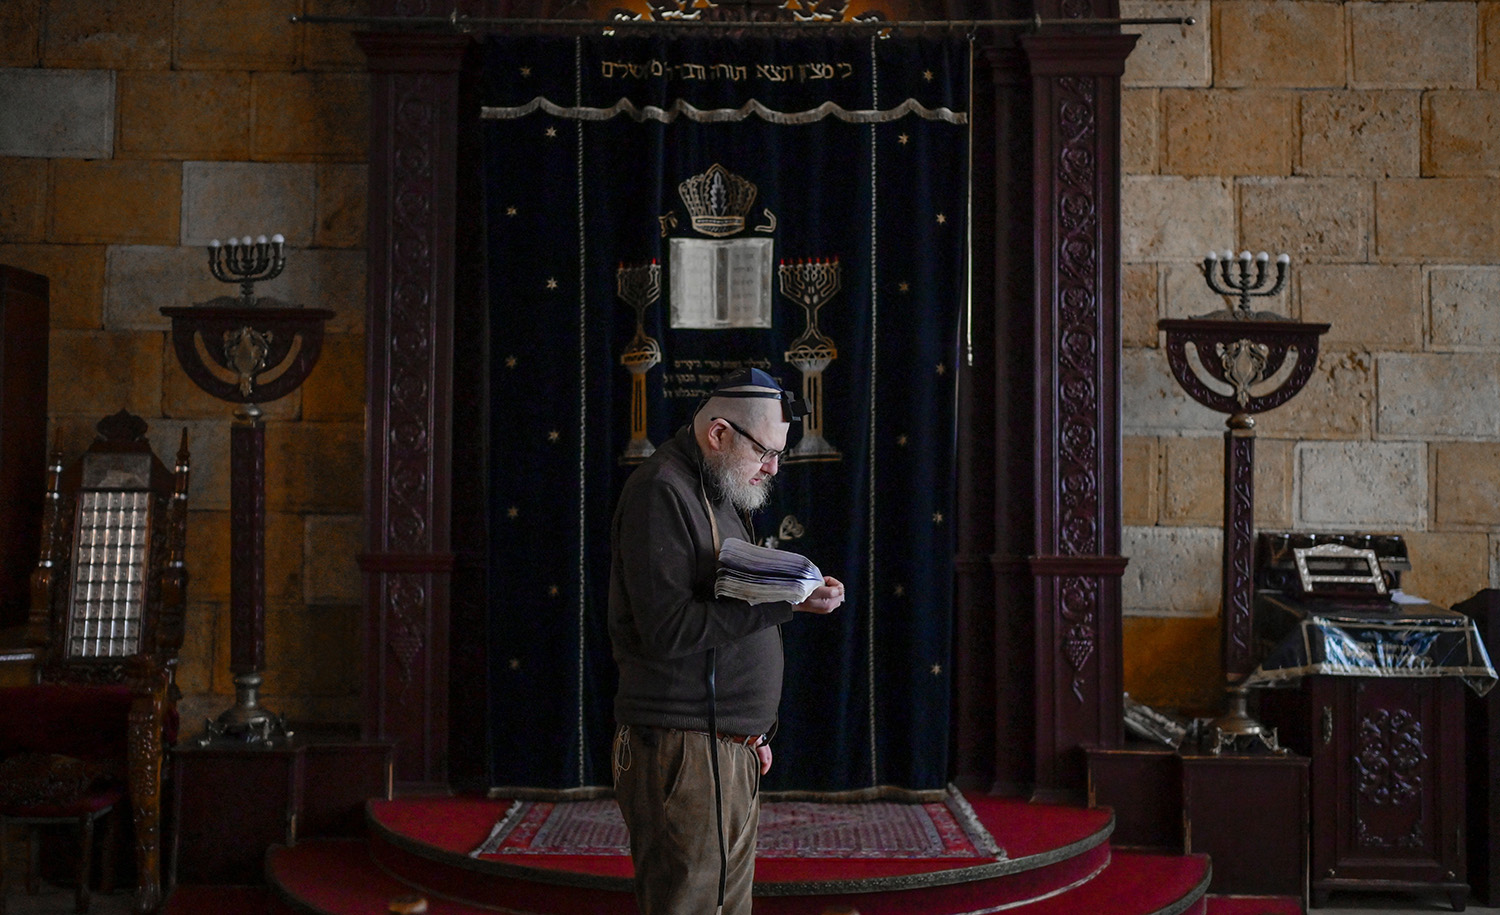 A Jewish man prays in the Chabad Synagogue in Odessa on March 9, 2022. BULENT KILIC/AFP via Getty Images.
